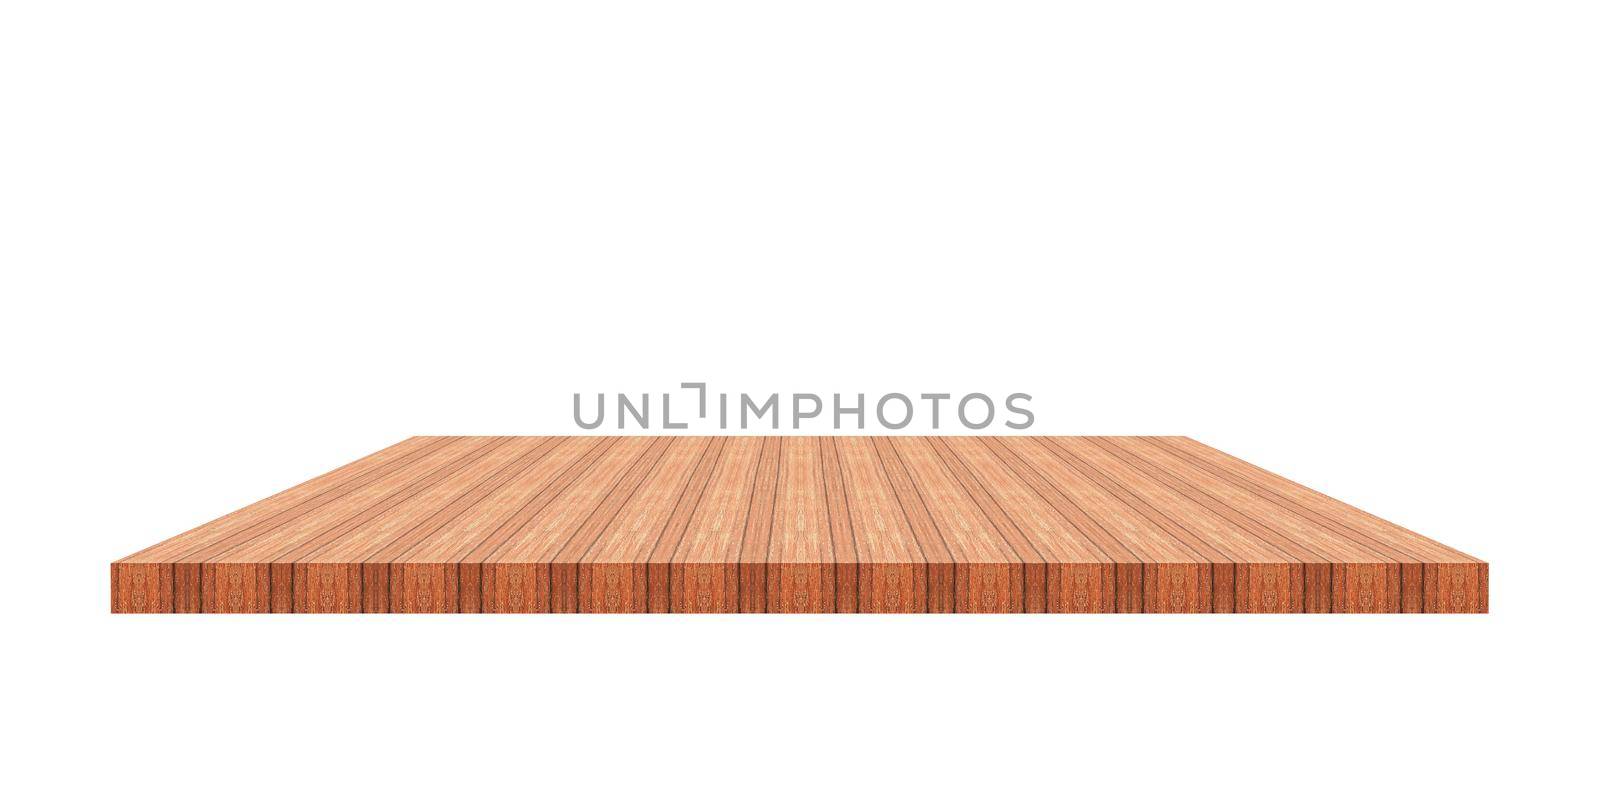 wooden shelves design isolated on white background for your product